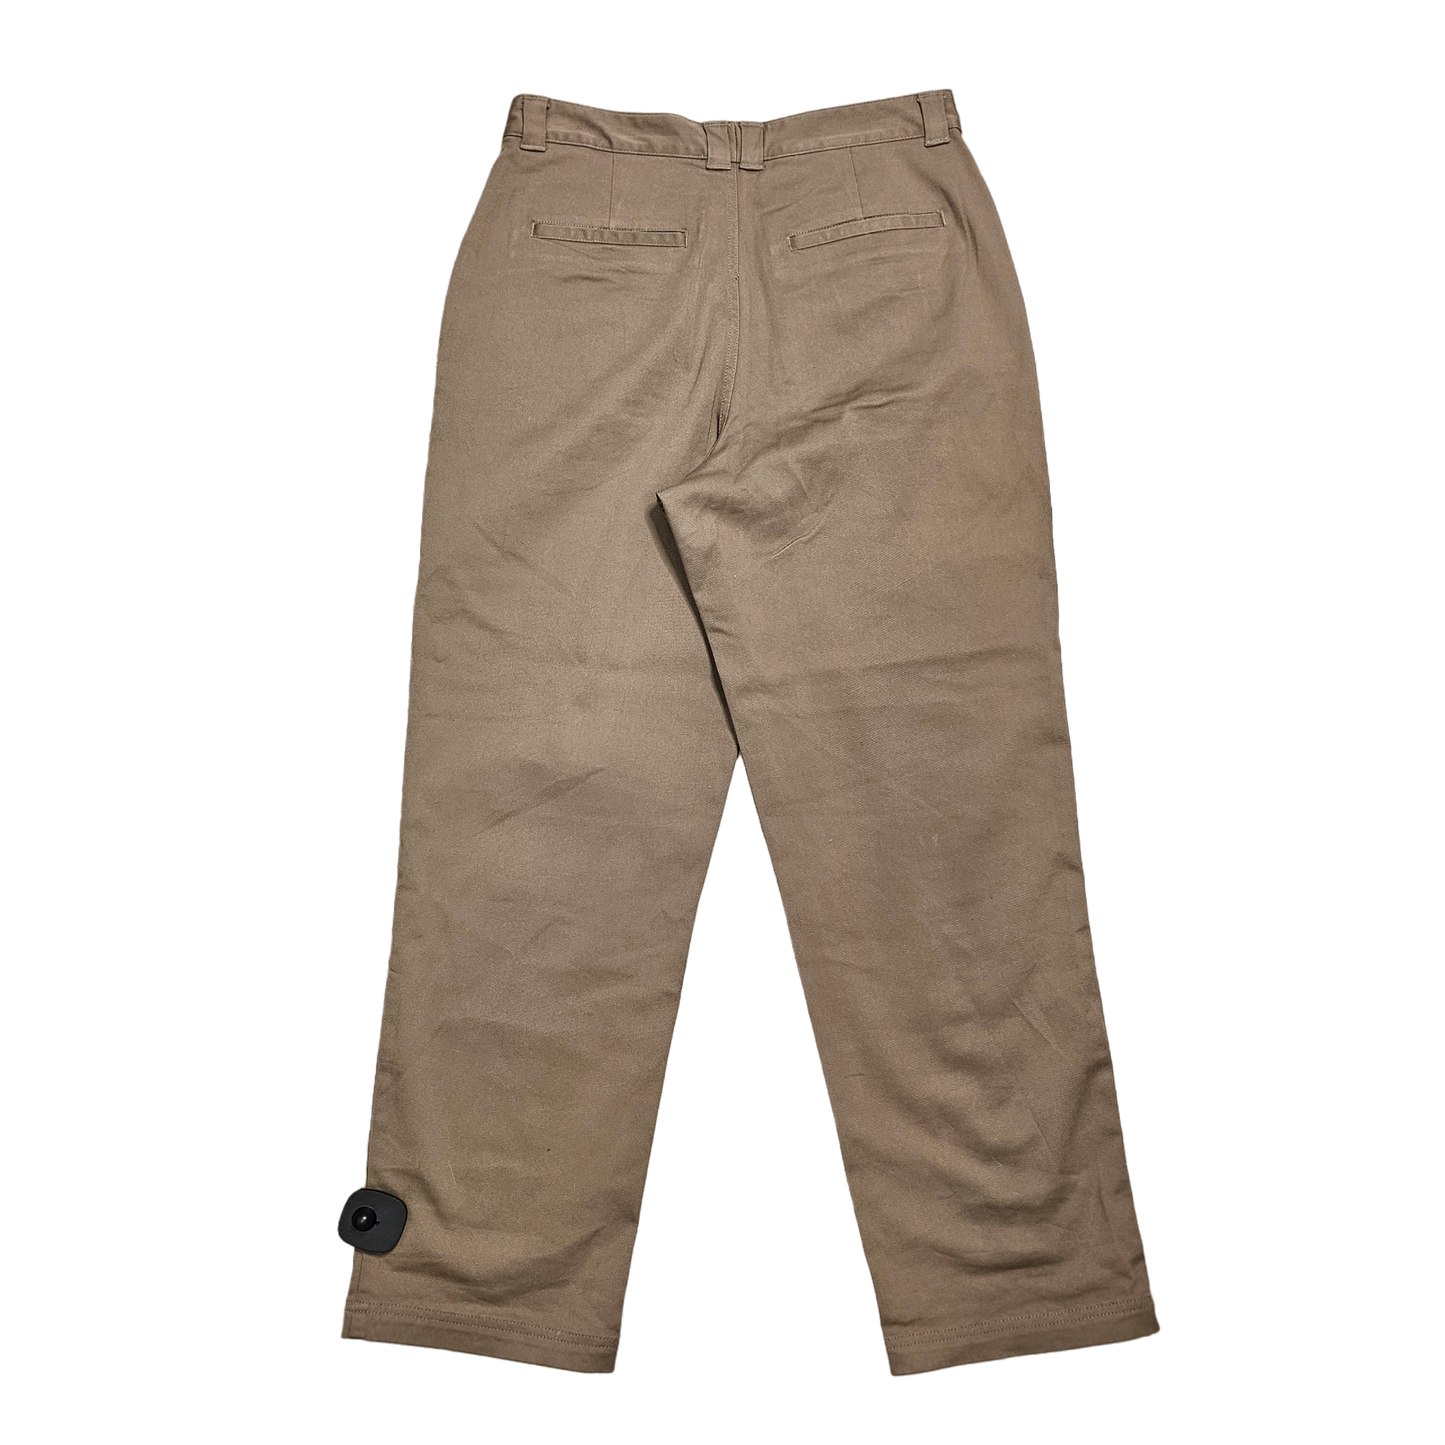 Pants Chinos & Khakis By Vans  Size: 28/6